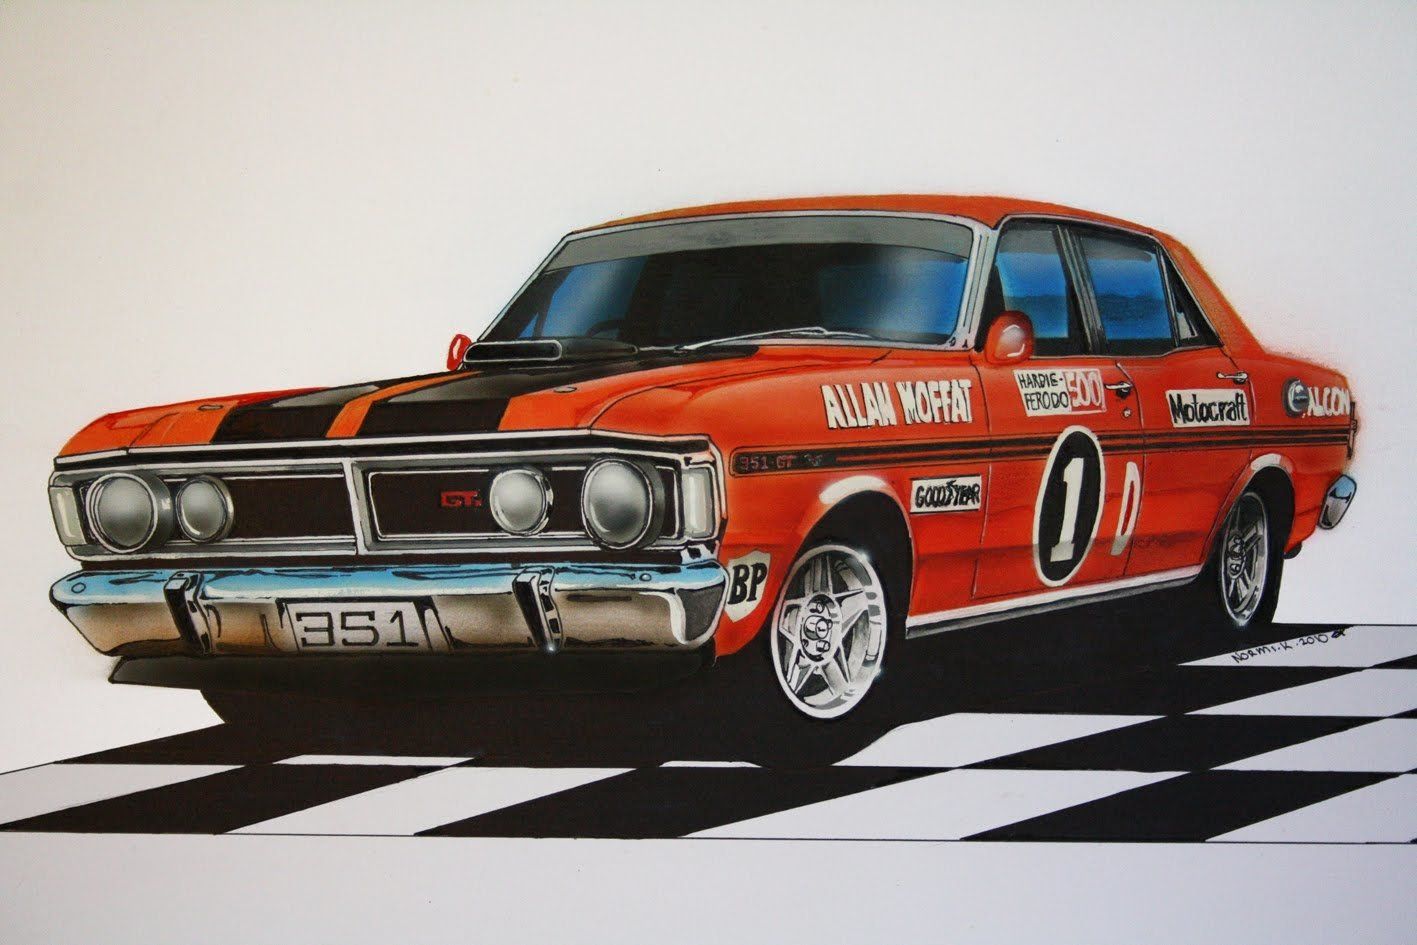 Ford Falcon Xy Gtho Cars Background Wallpaper On